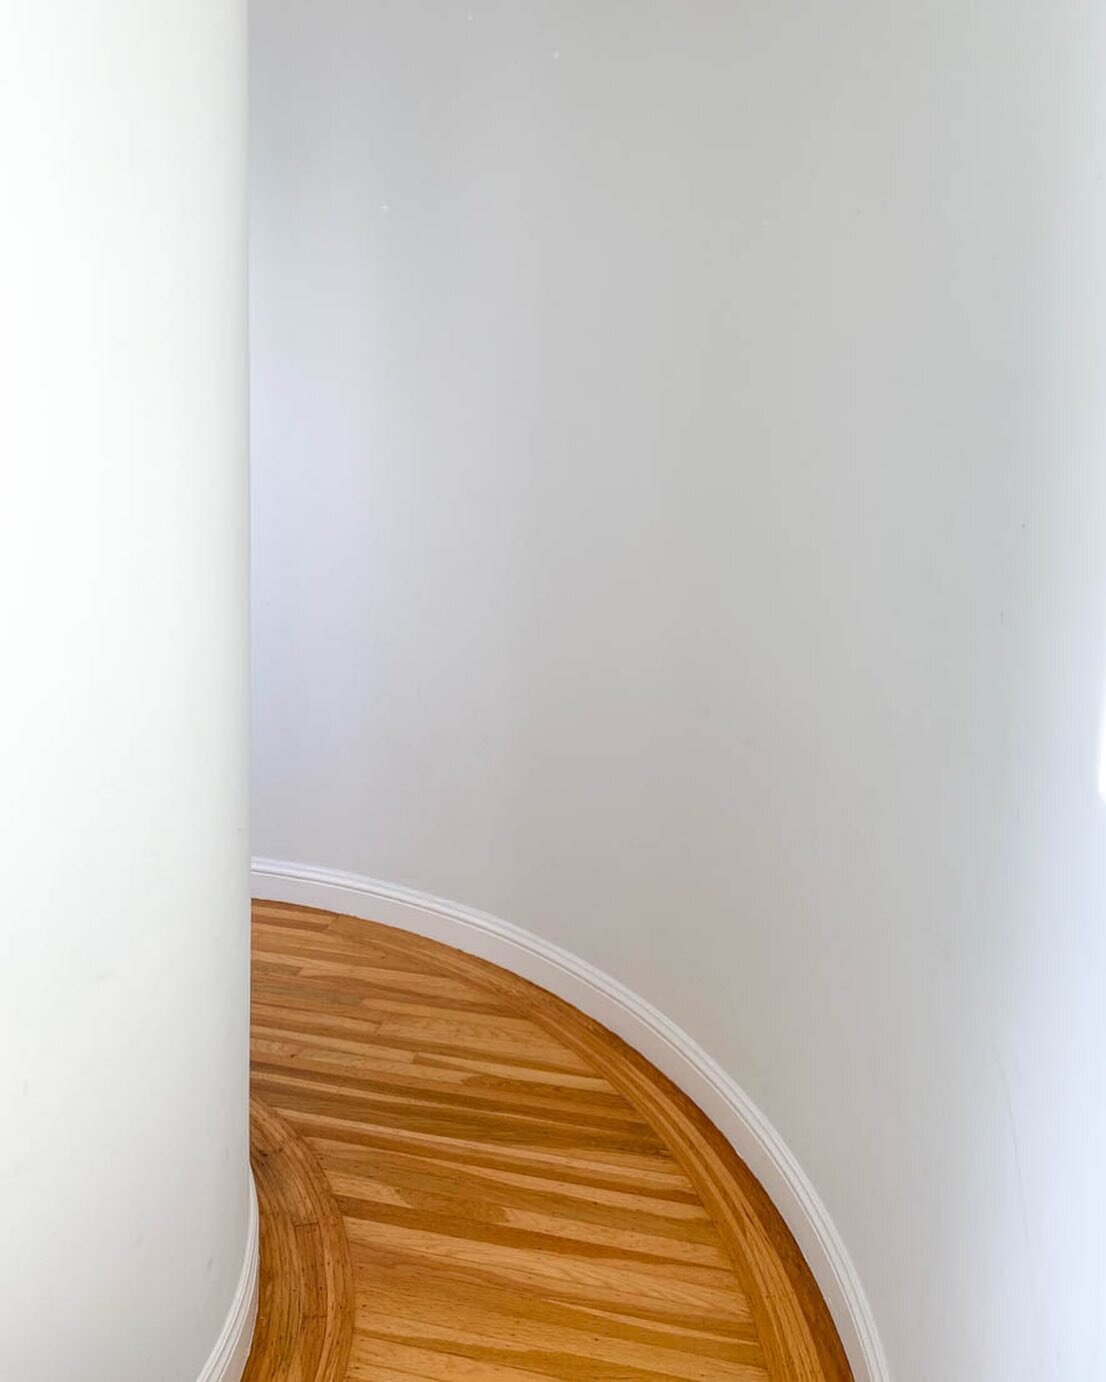 New blog post! Revealing the before photos - including this quirky hallway - for the upcoming renovation of a currently not-so-modern mediterranean home.  #renovation #interiordesign #beforeandafter #houserenovation #houseremodel #